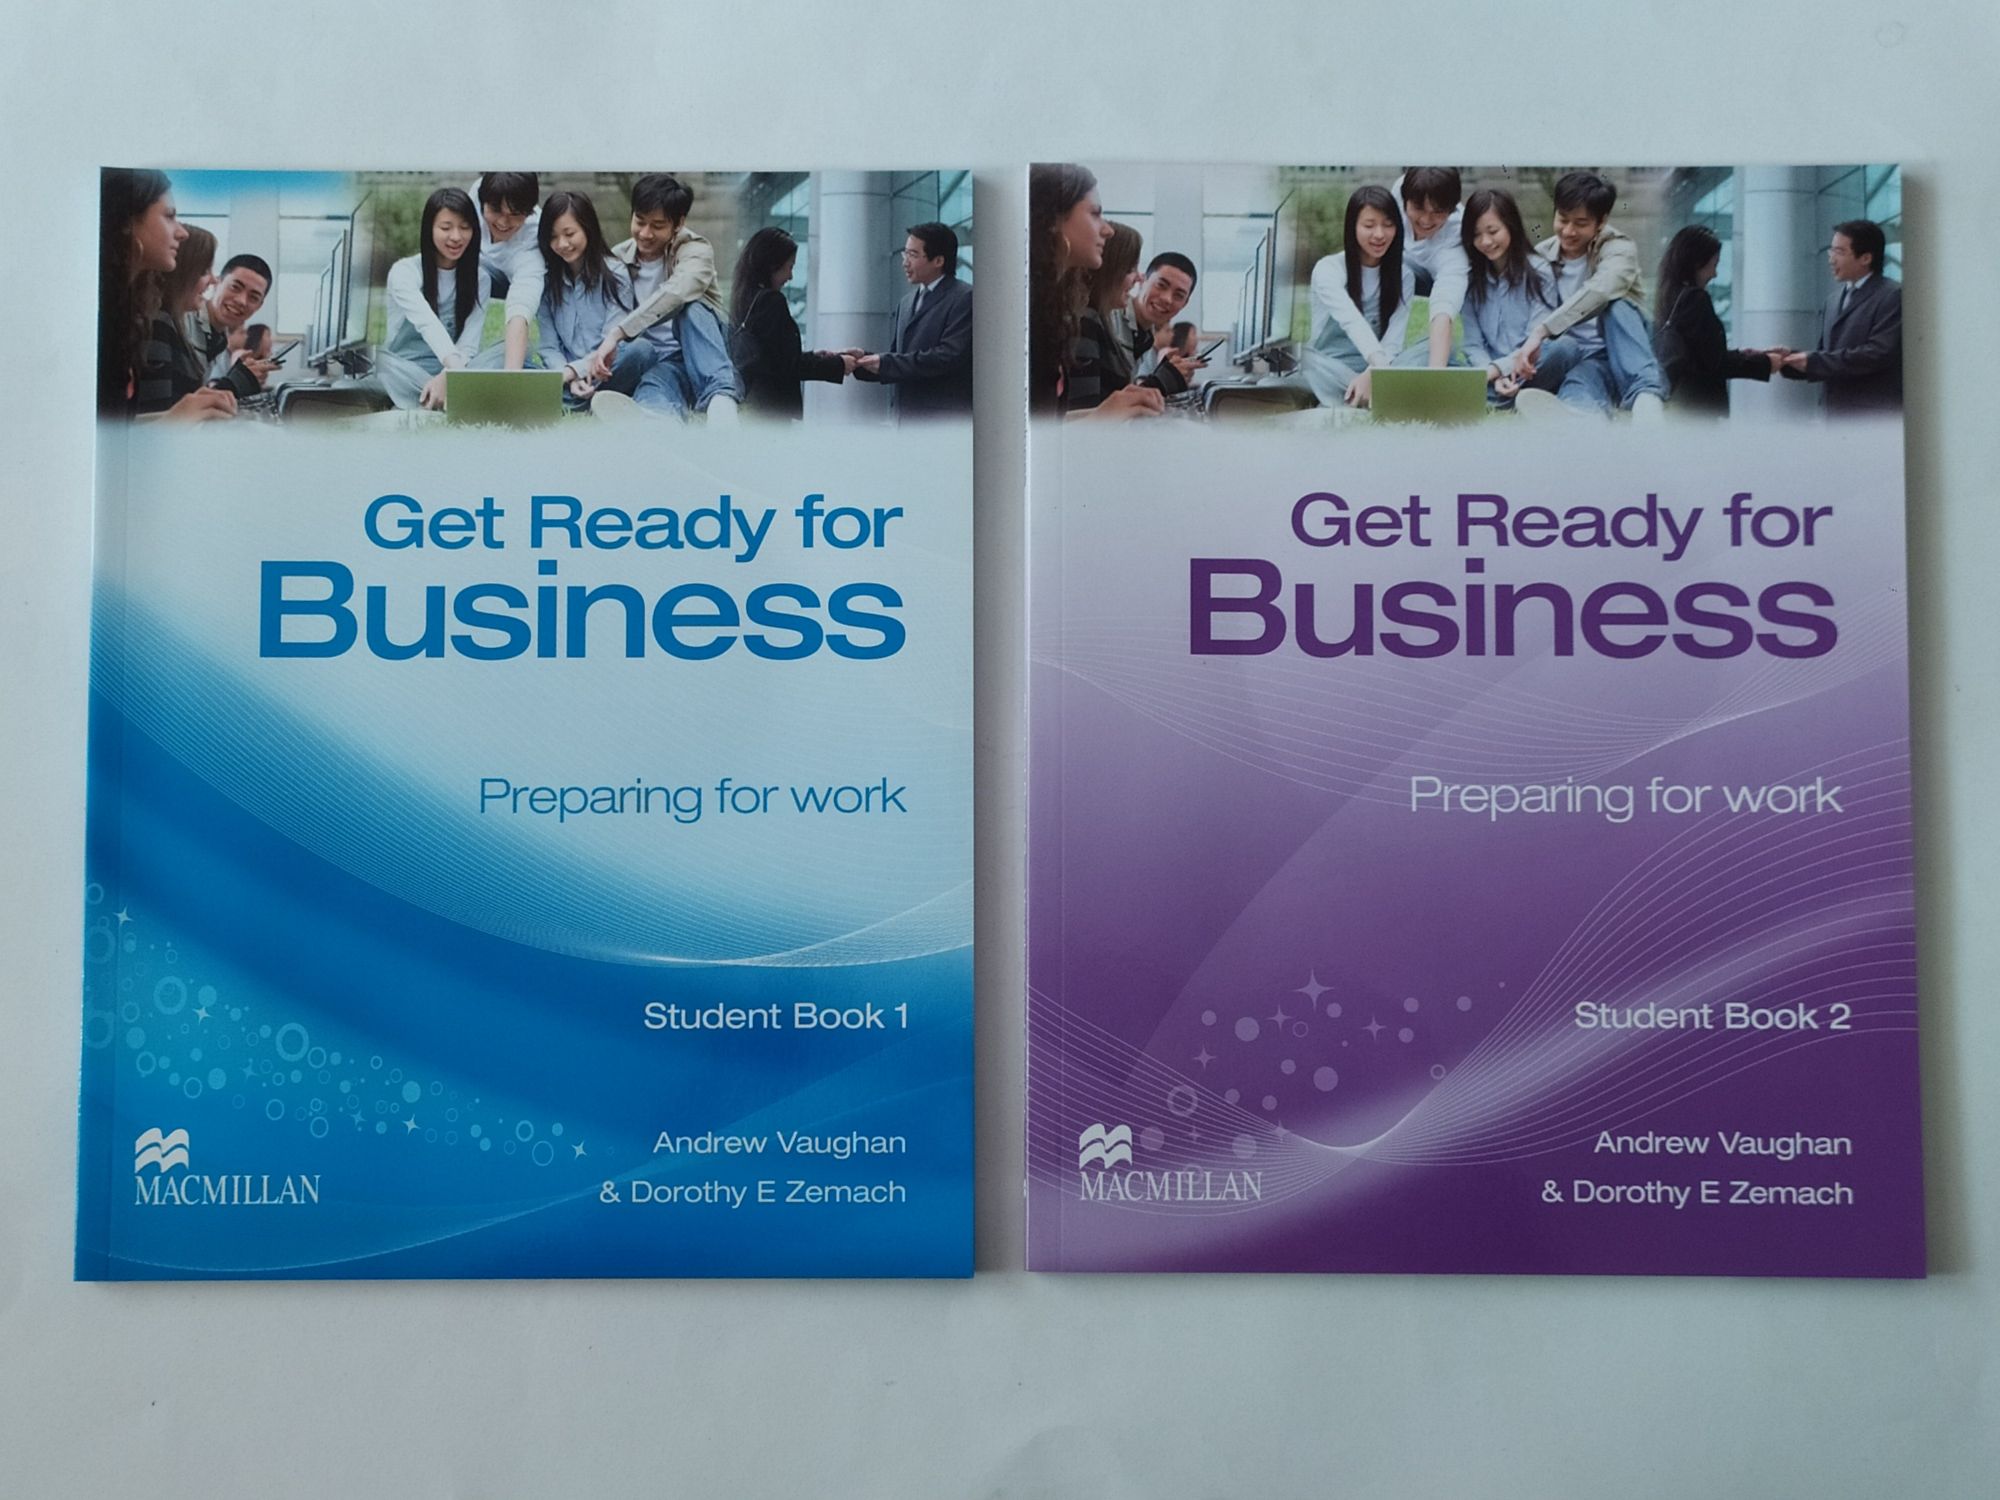 Nowe! Get Ready for Business, Preparing for work, Student Book 1 i 2